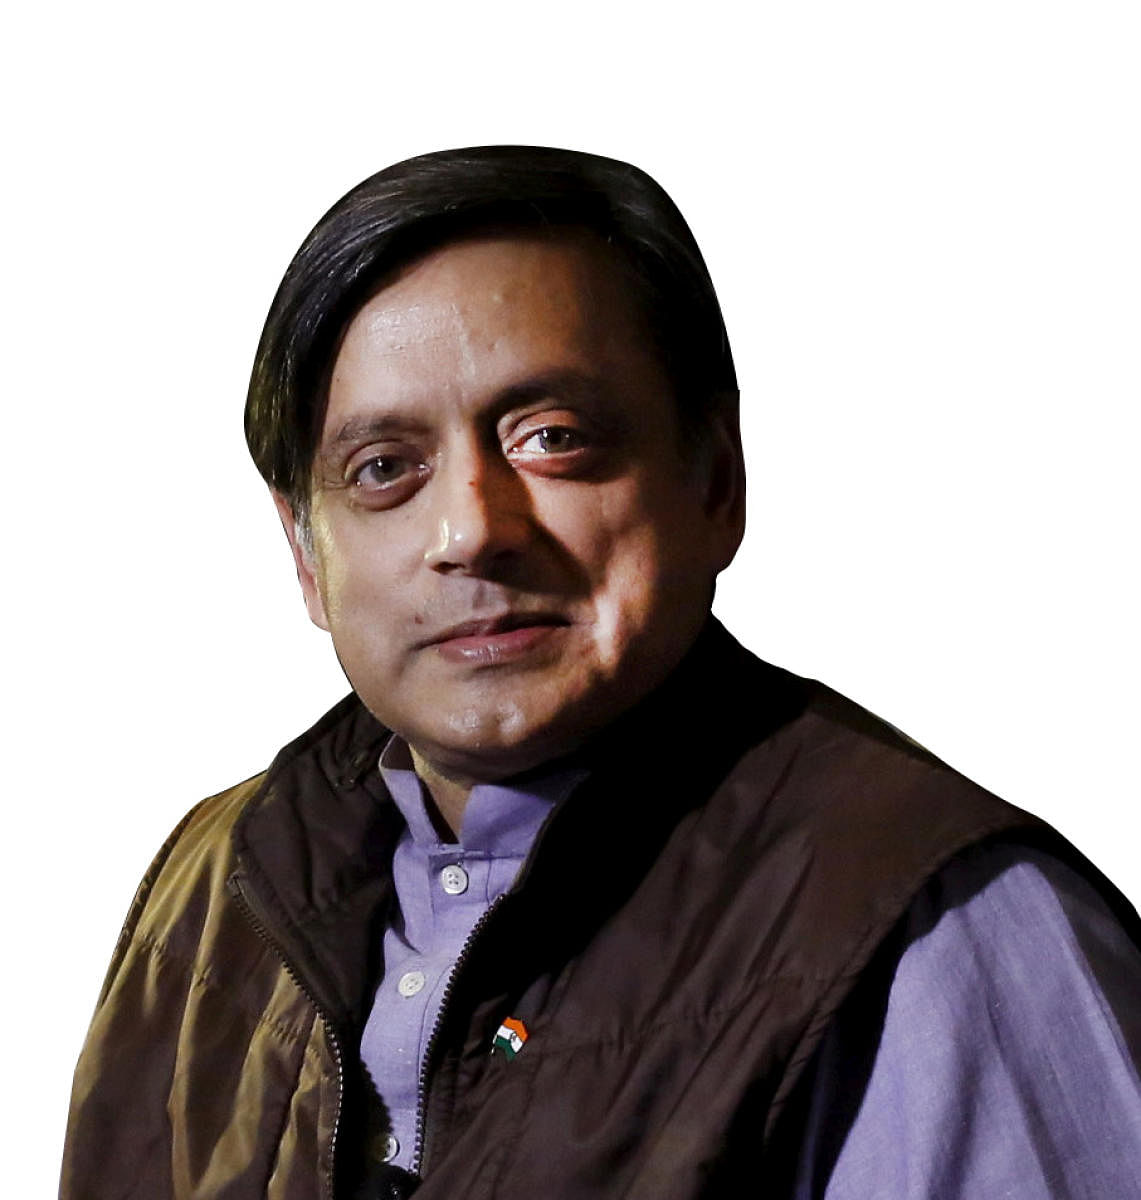 FILE PHOTO: Shashi Tharoor, a Member of Parliament from India's main opposition Congress party, poses at his office in New Delhi, India, January 25, 2016. To match Special Report INDIA-MODI/CULTURE REUTERS/Anindito Mukherjee/File Photoshashi tharoor